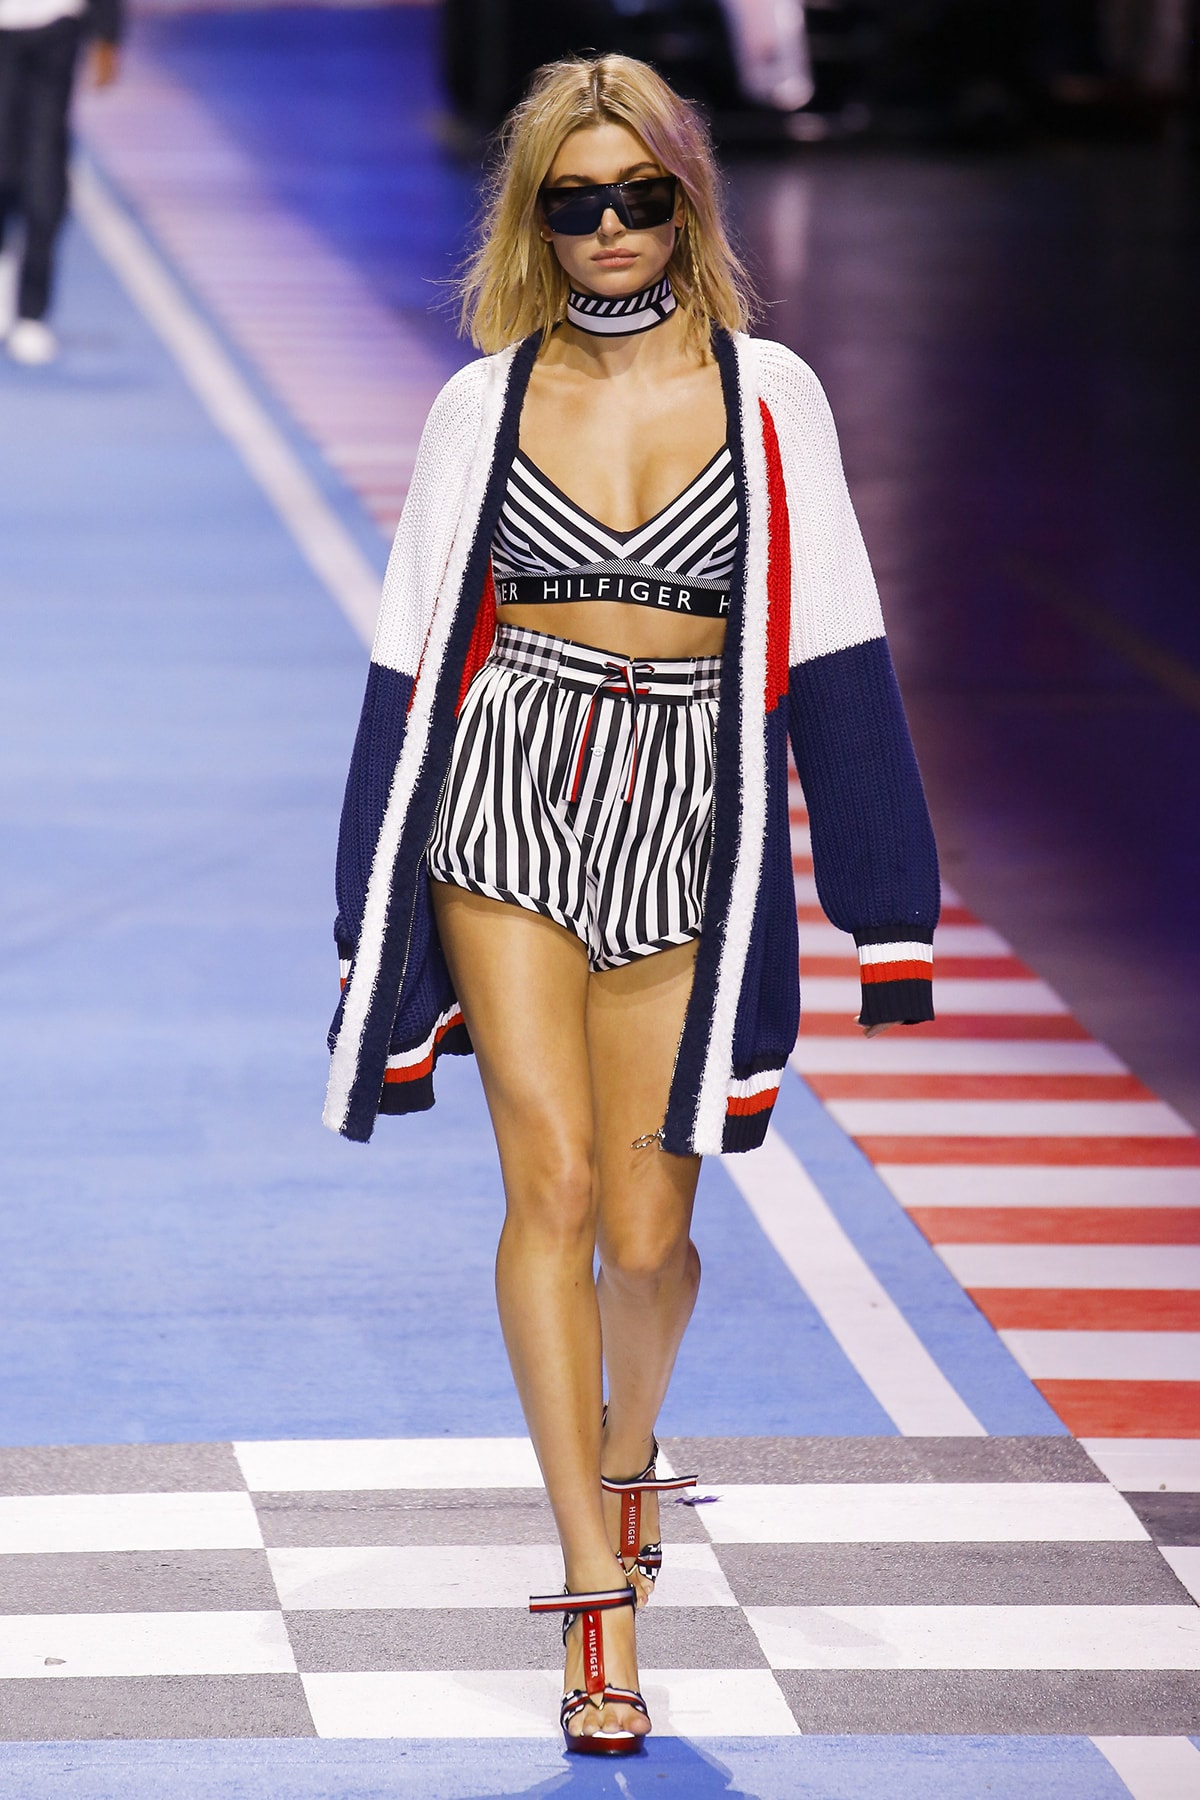 Tommy Hilfiger Pop-Up and Launch Party at HBX